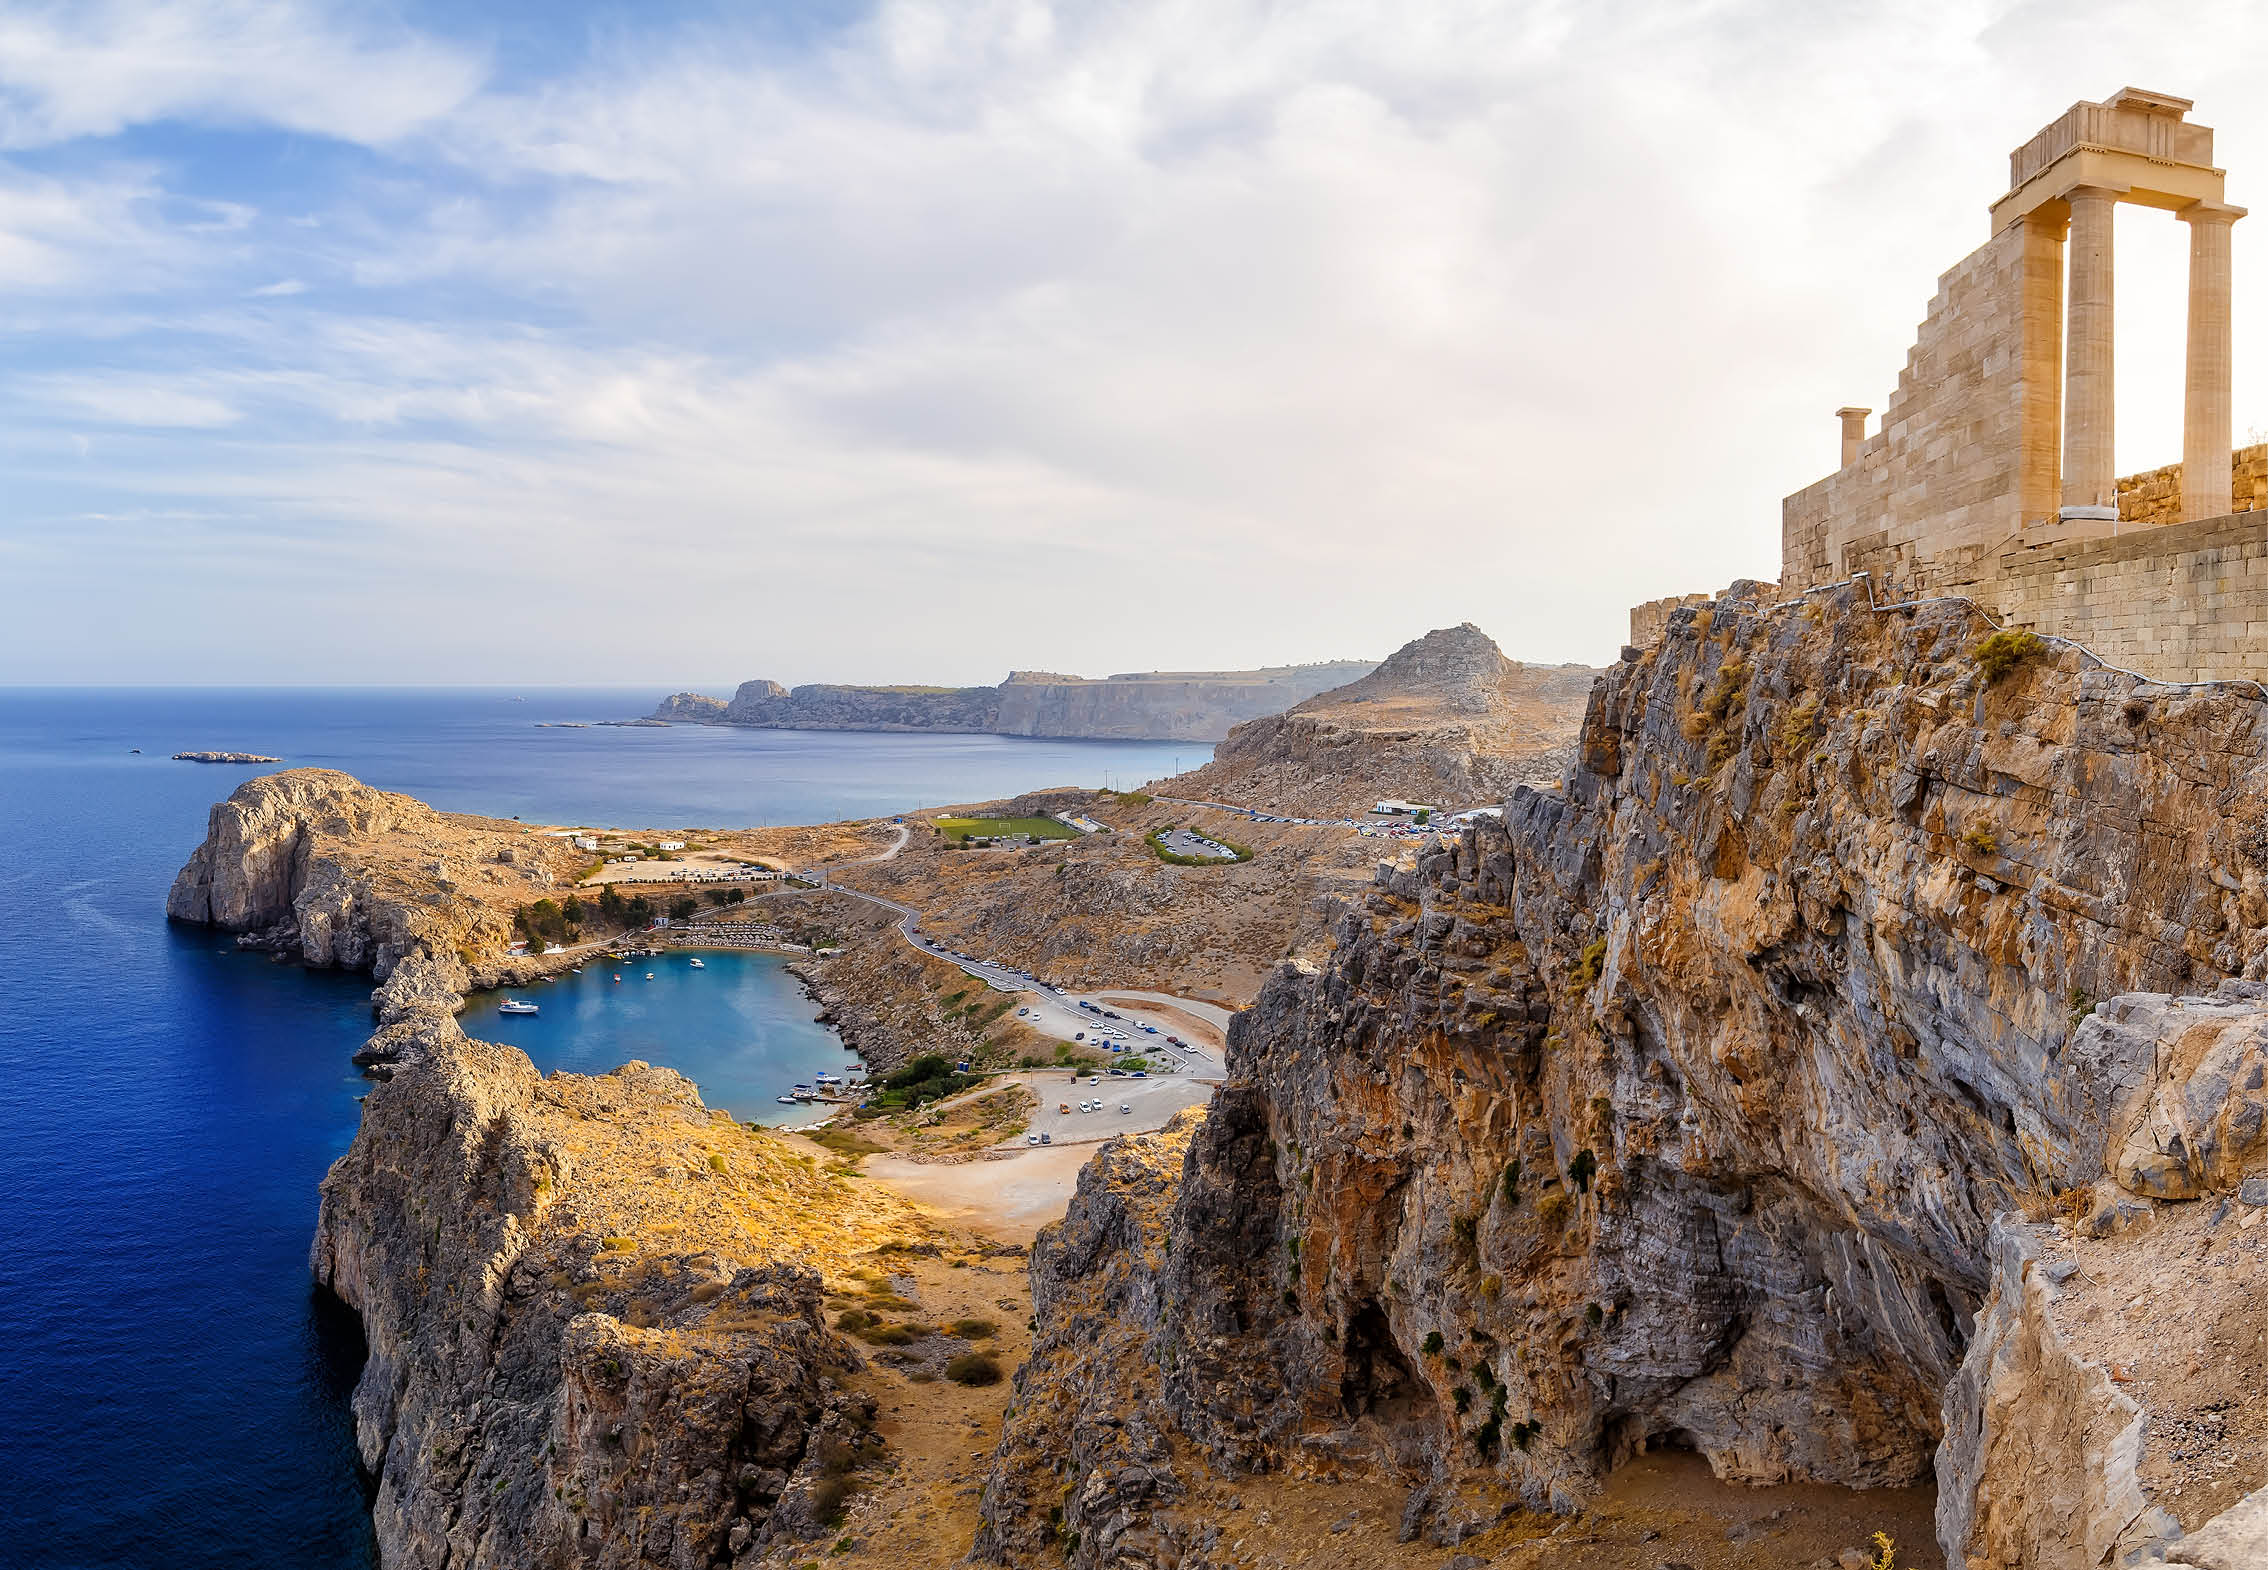 Greece  Rhodes  Acropolis of Lindos  Doric columns of the ancient Temple of Athena Lindia the IV century BC and the bay of St  Paul